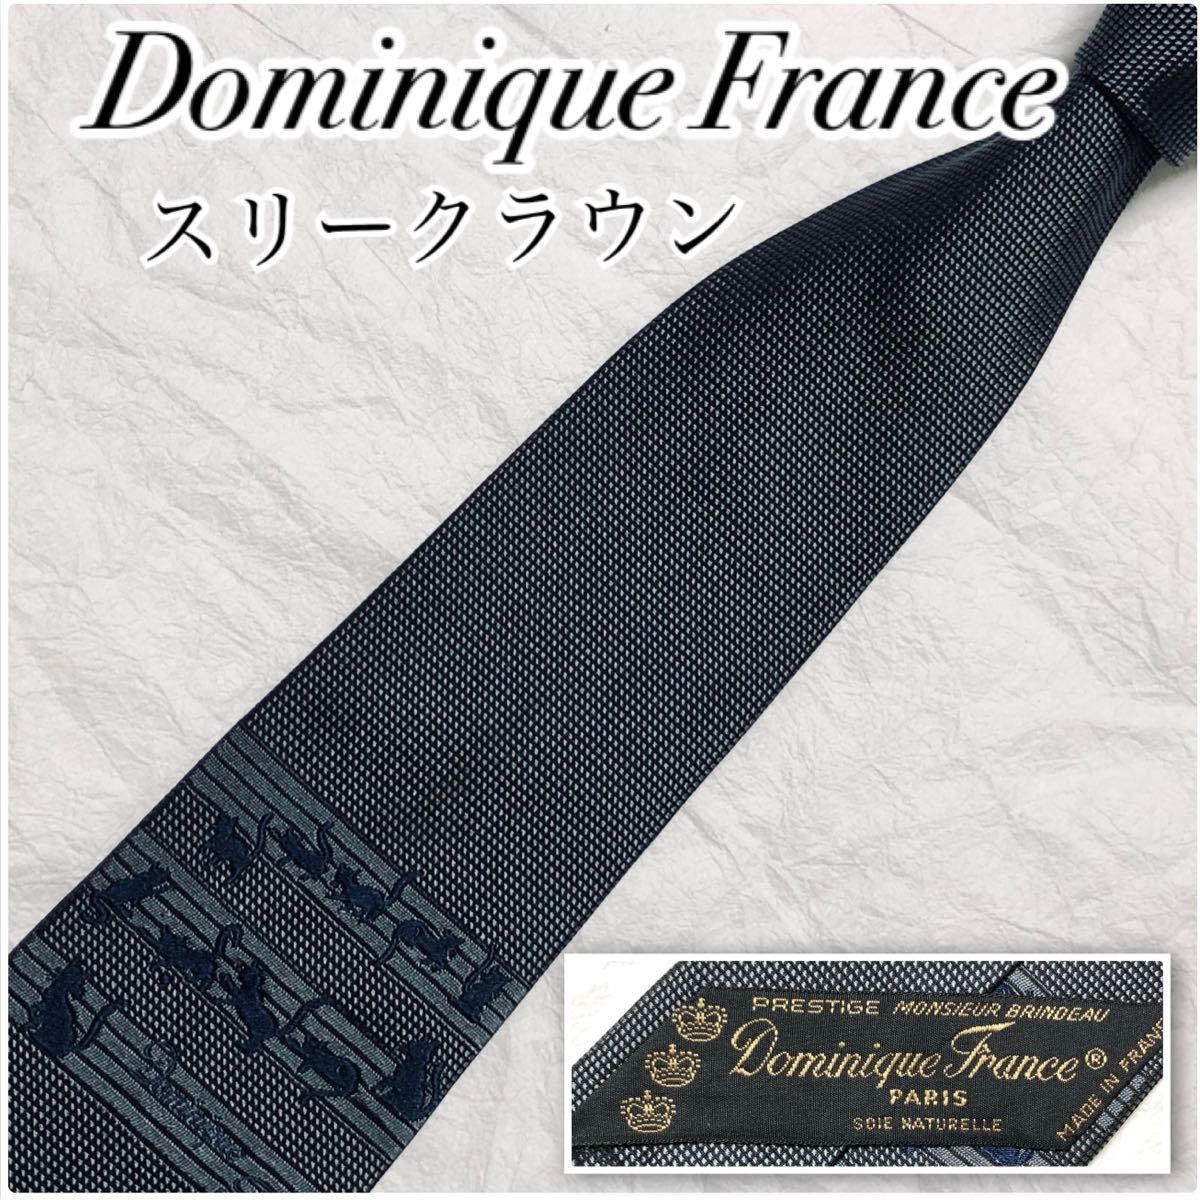 Dominique Franceの新品・未使用品・中古品｜PayPayフリマ